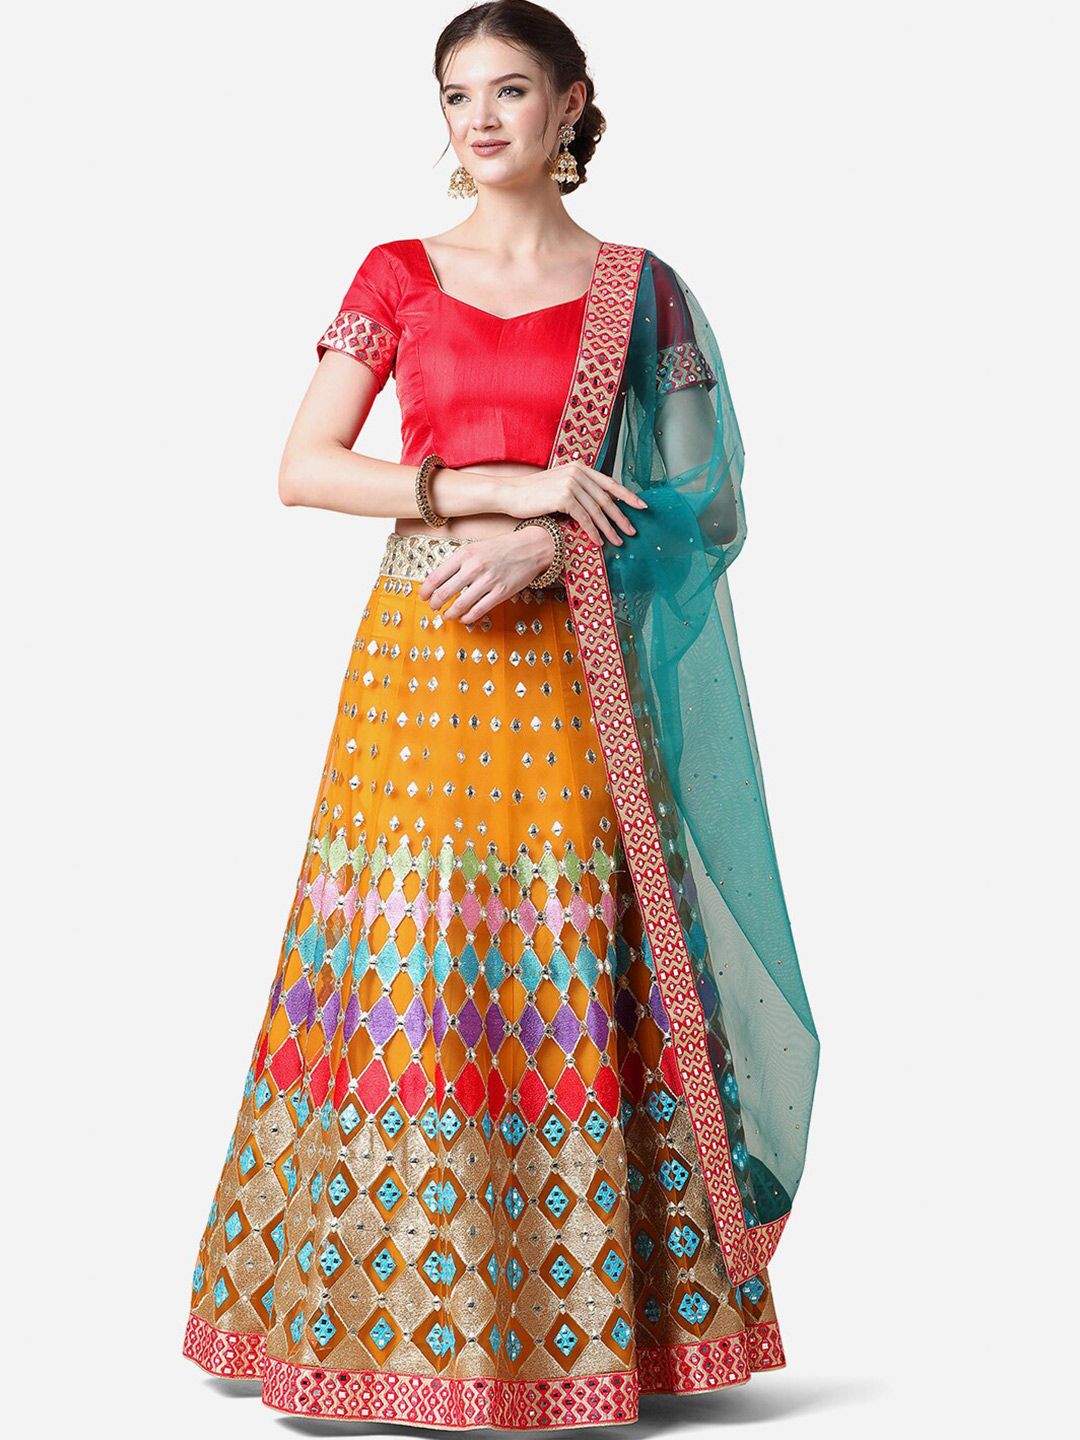 Cloth's Villa Yellow & Blue Semi-Stitched Lehenga & Unstitched Blouse With Dupatta Price in India